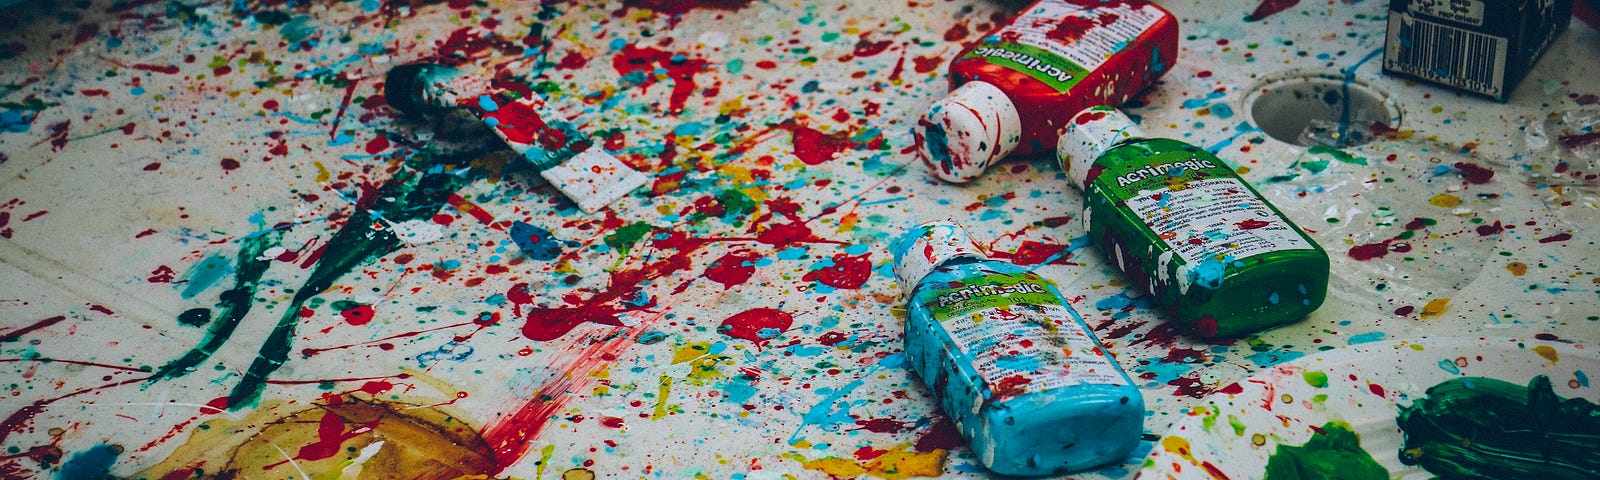 A lot of messy, spattered paint and empty paint bottles on the floor.